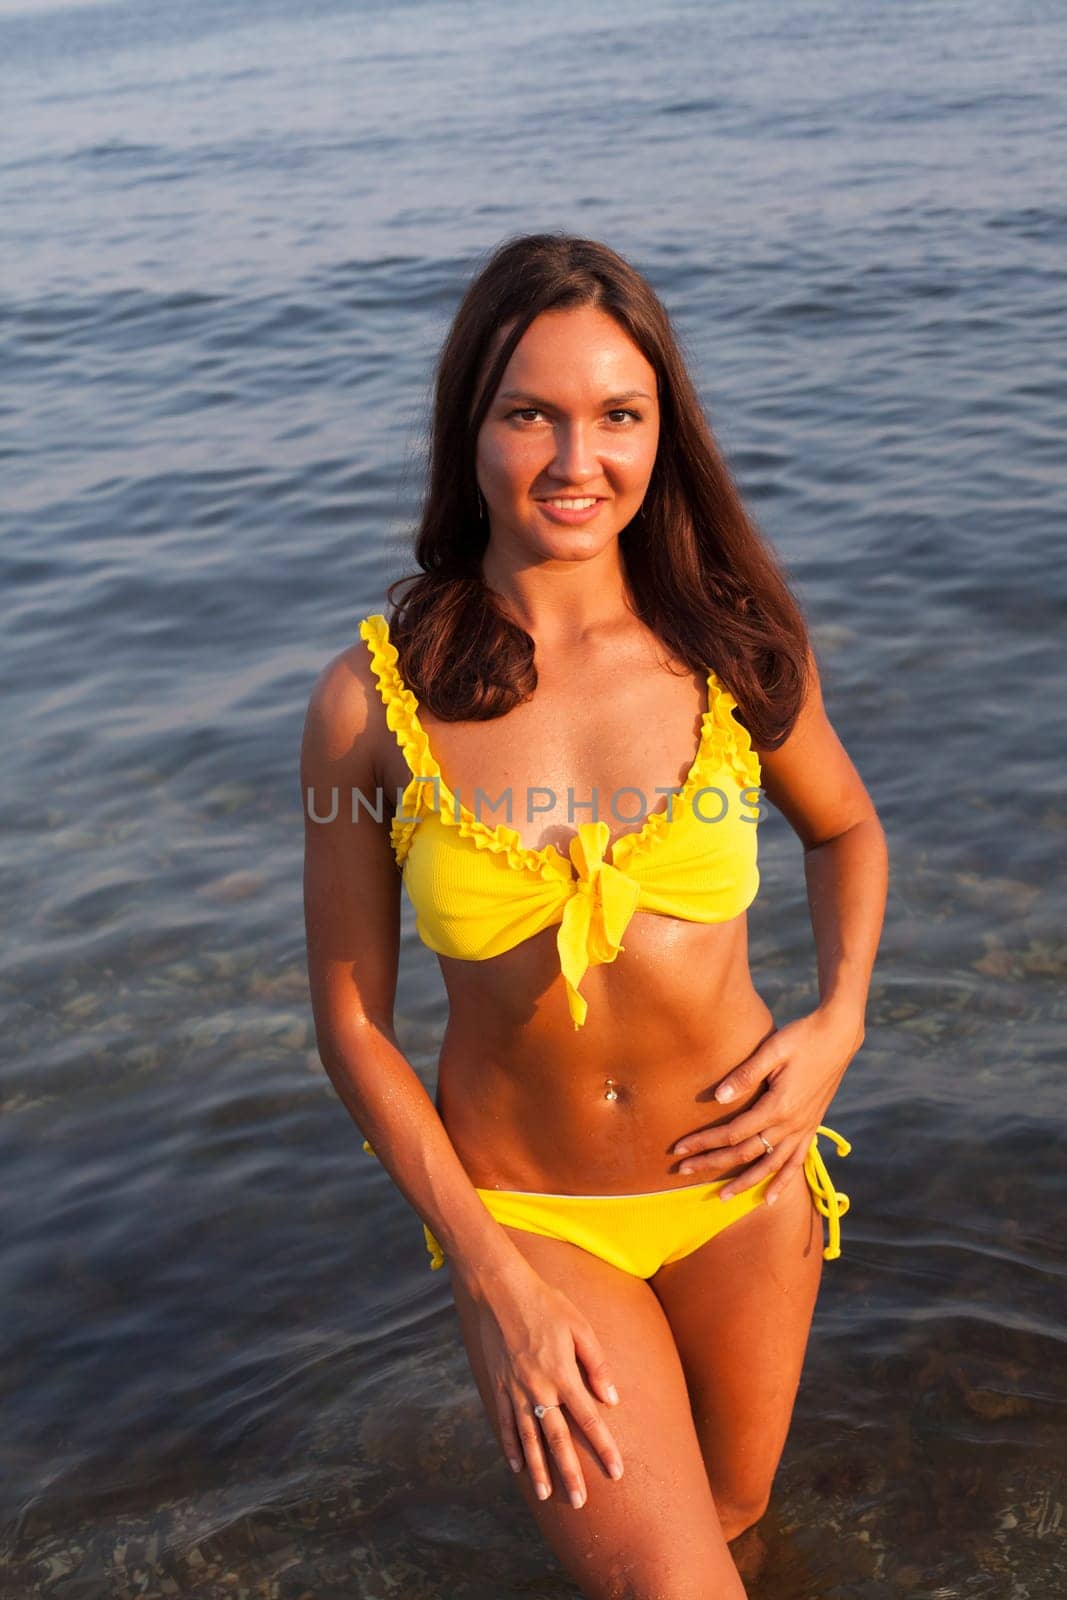 woman with long hair in a yellow swimsuit walks on the beach by the sea